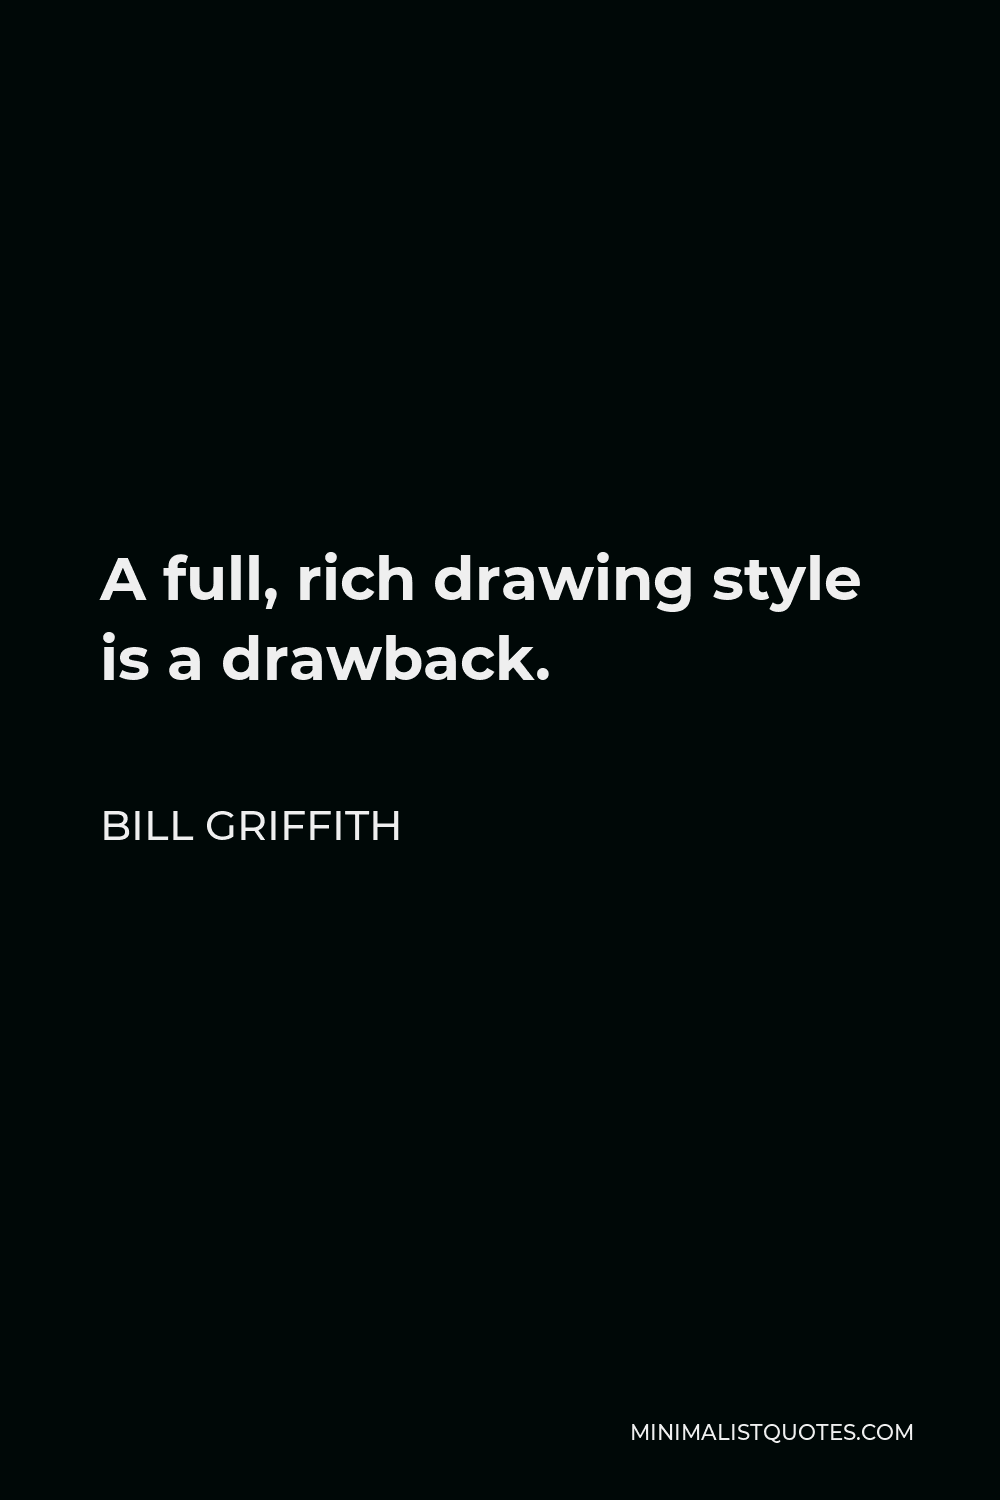 Bill Griffith Quote - A full, rich drawing style is a drawback.